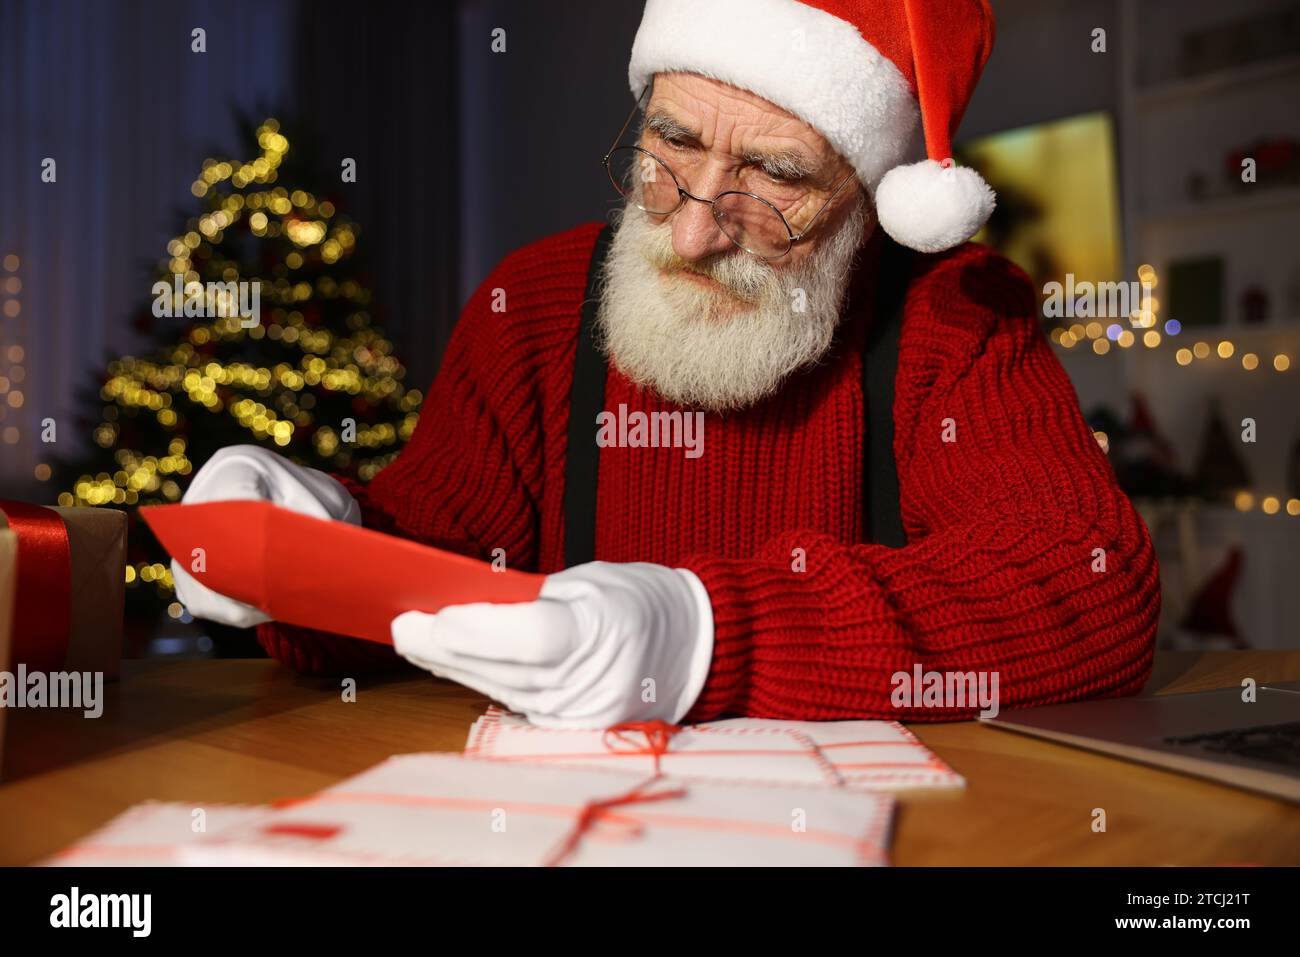 Santa Claus opening letter at his workplace in room decorated for Christmas Stock Photo